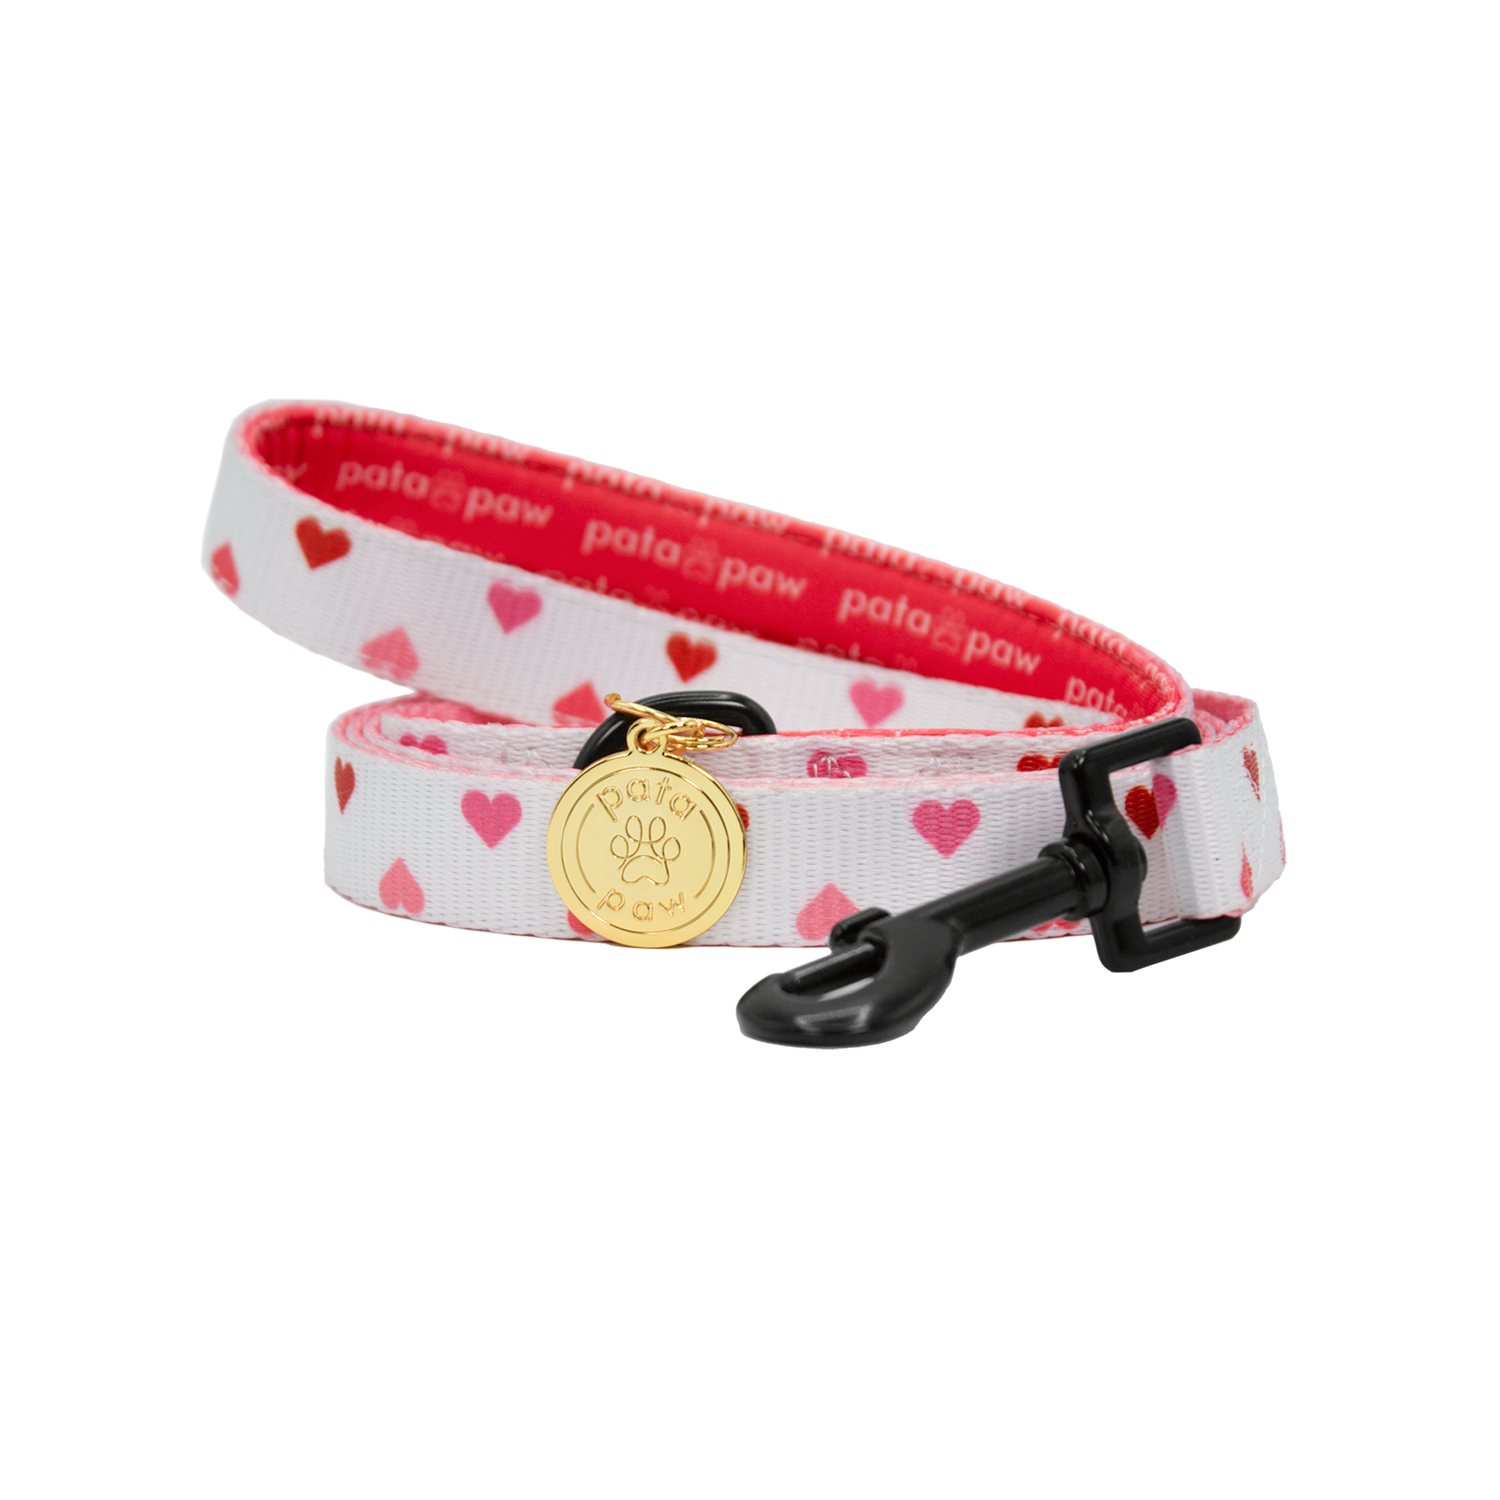 Pata Paw blush hearts leash rolled up